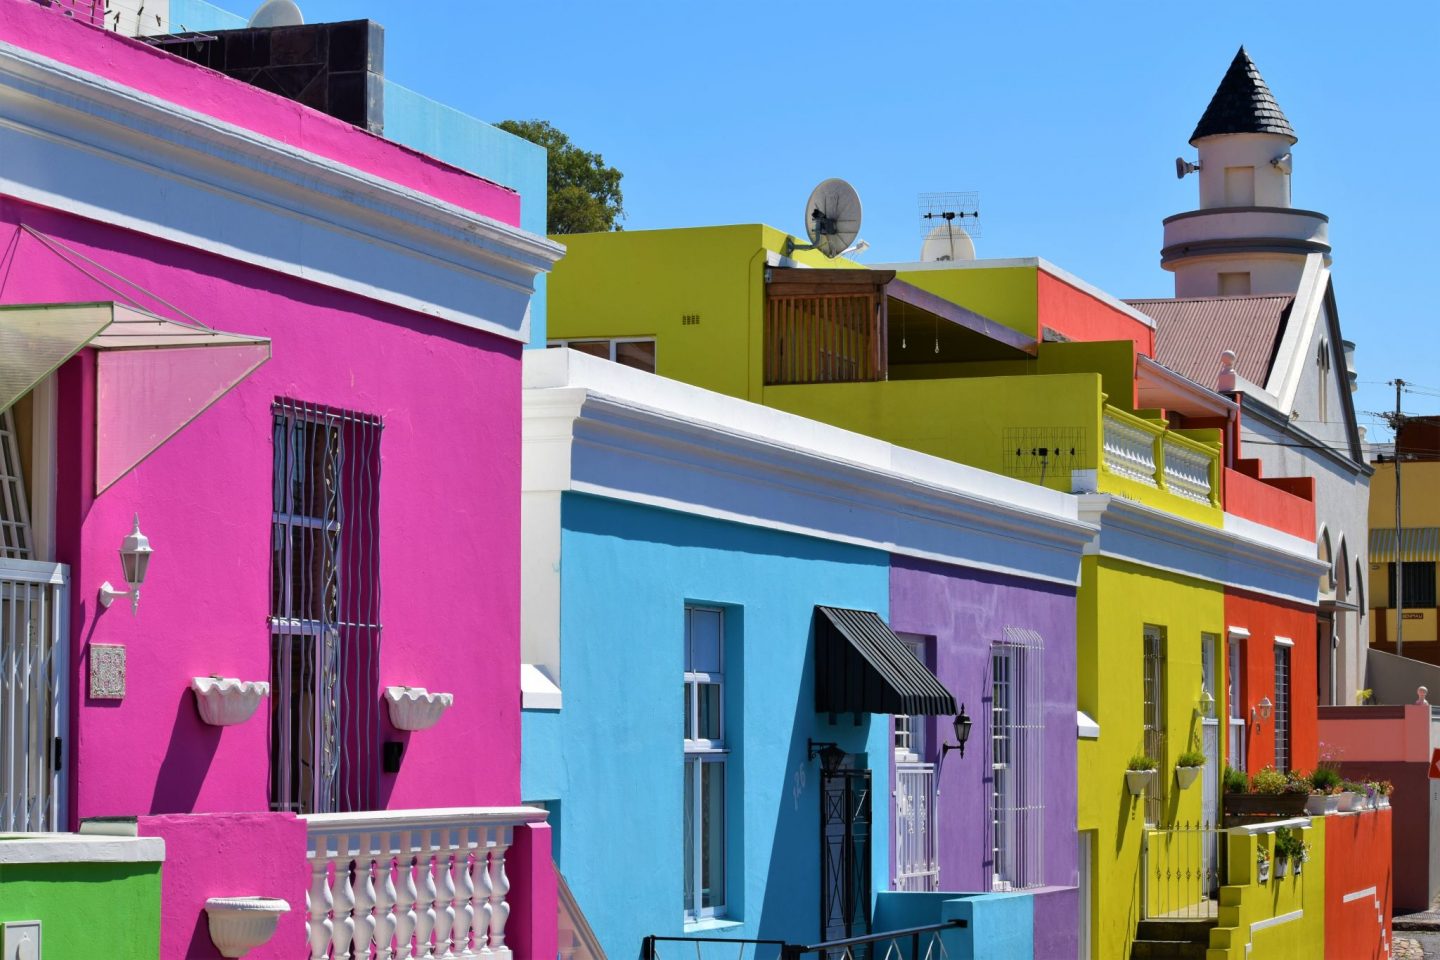 Bo-Kaap, South Africa is one of the world's most colourful cities